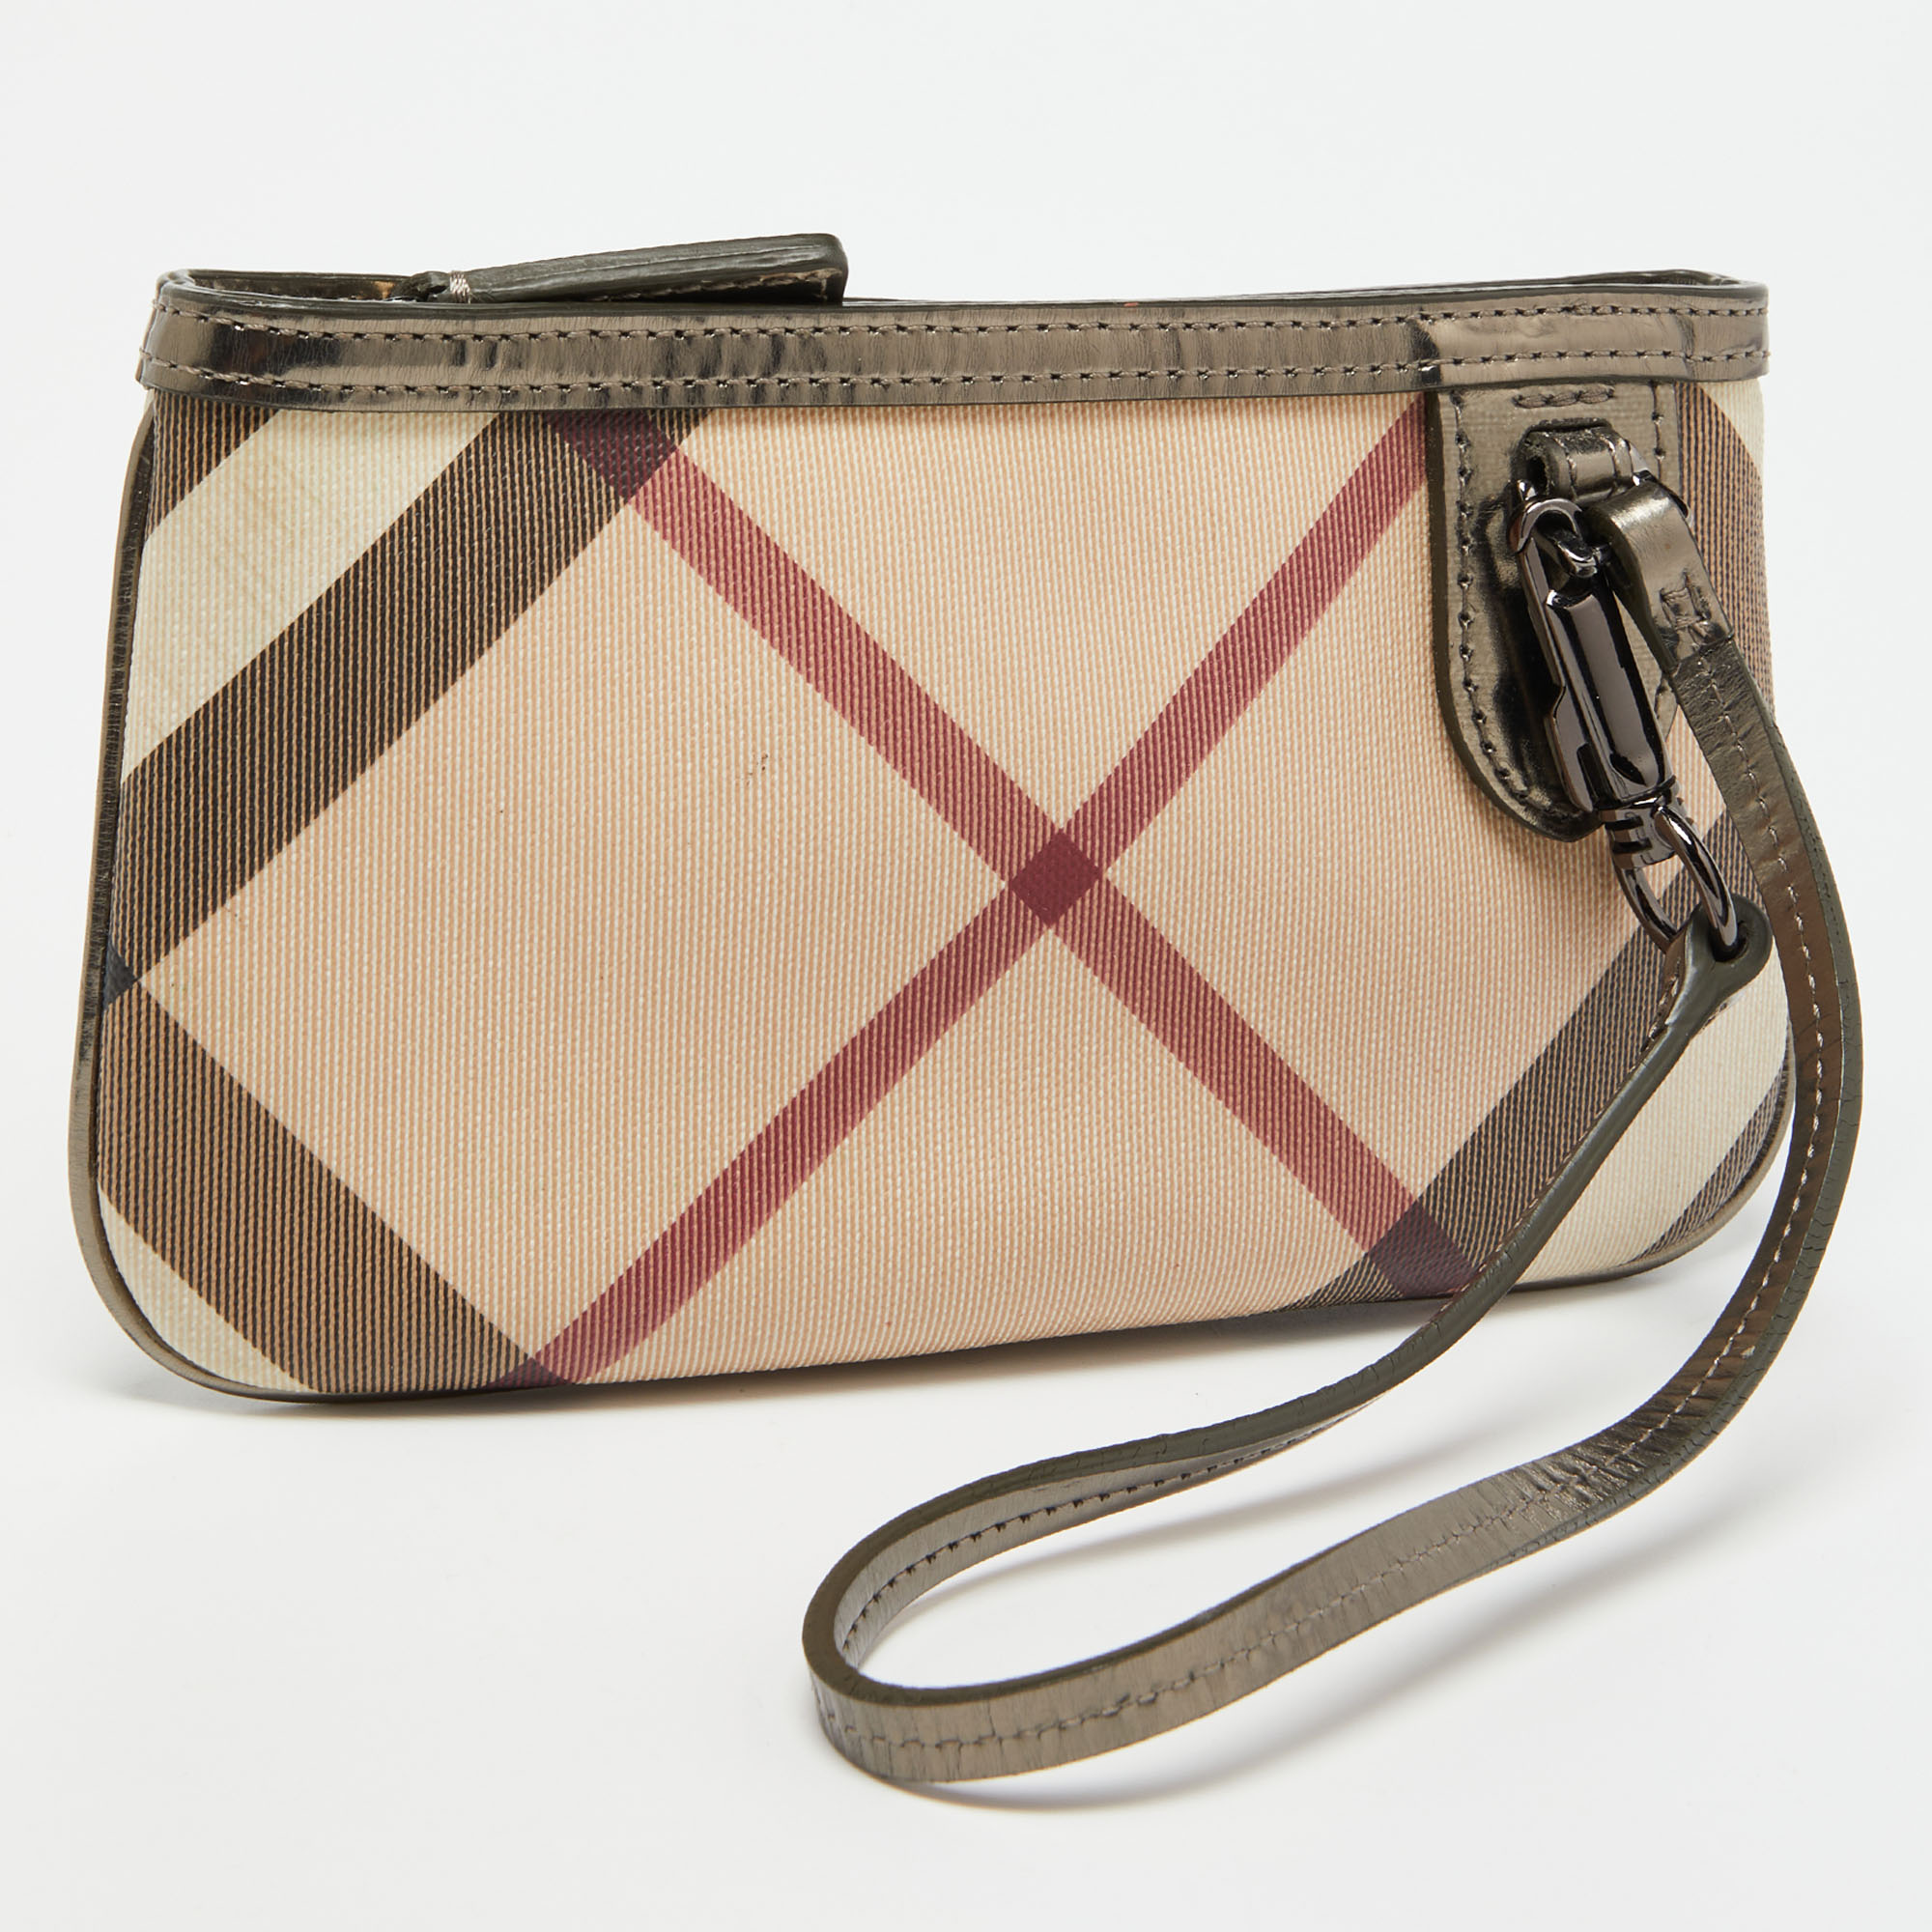 Burberry Beige Nova Check Coated Canvas And Patent Leather Zip Wristlet Clutch